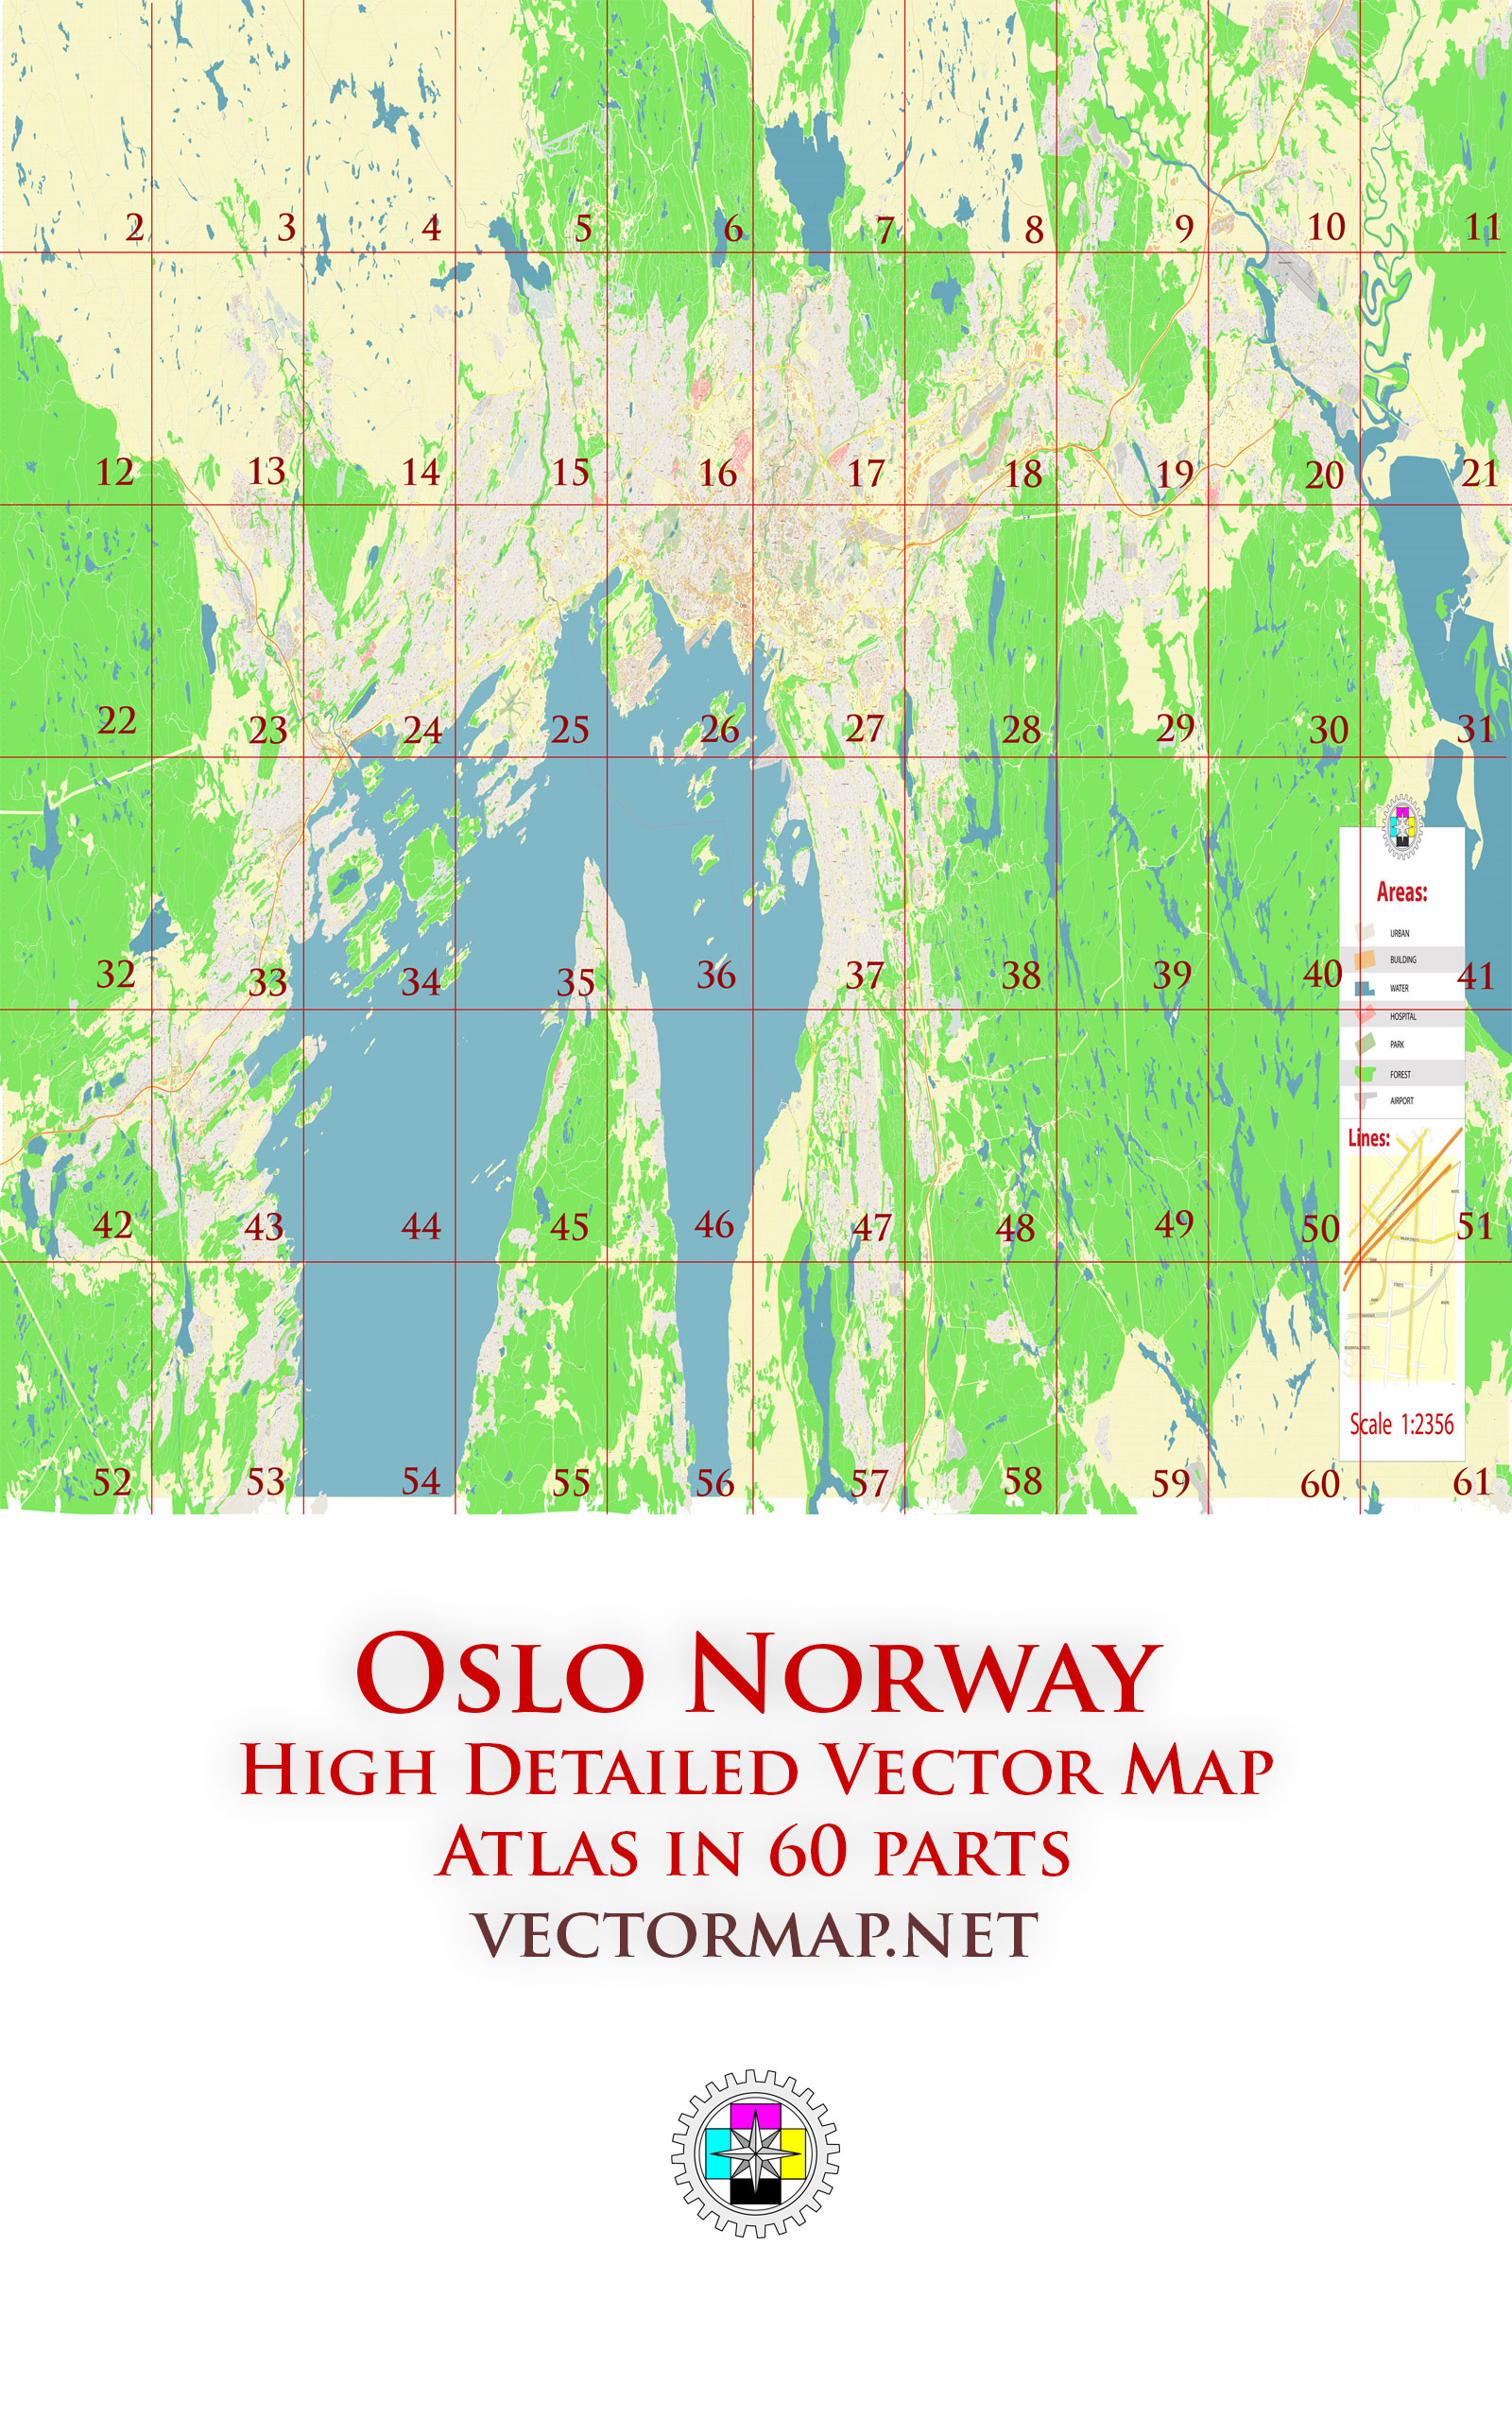 Oslo Norway Tourist Map multi-page atlas, contains 60 pages vector PDF